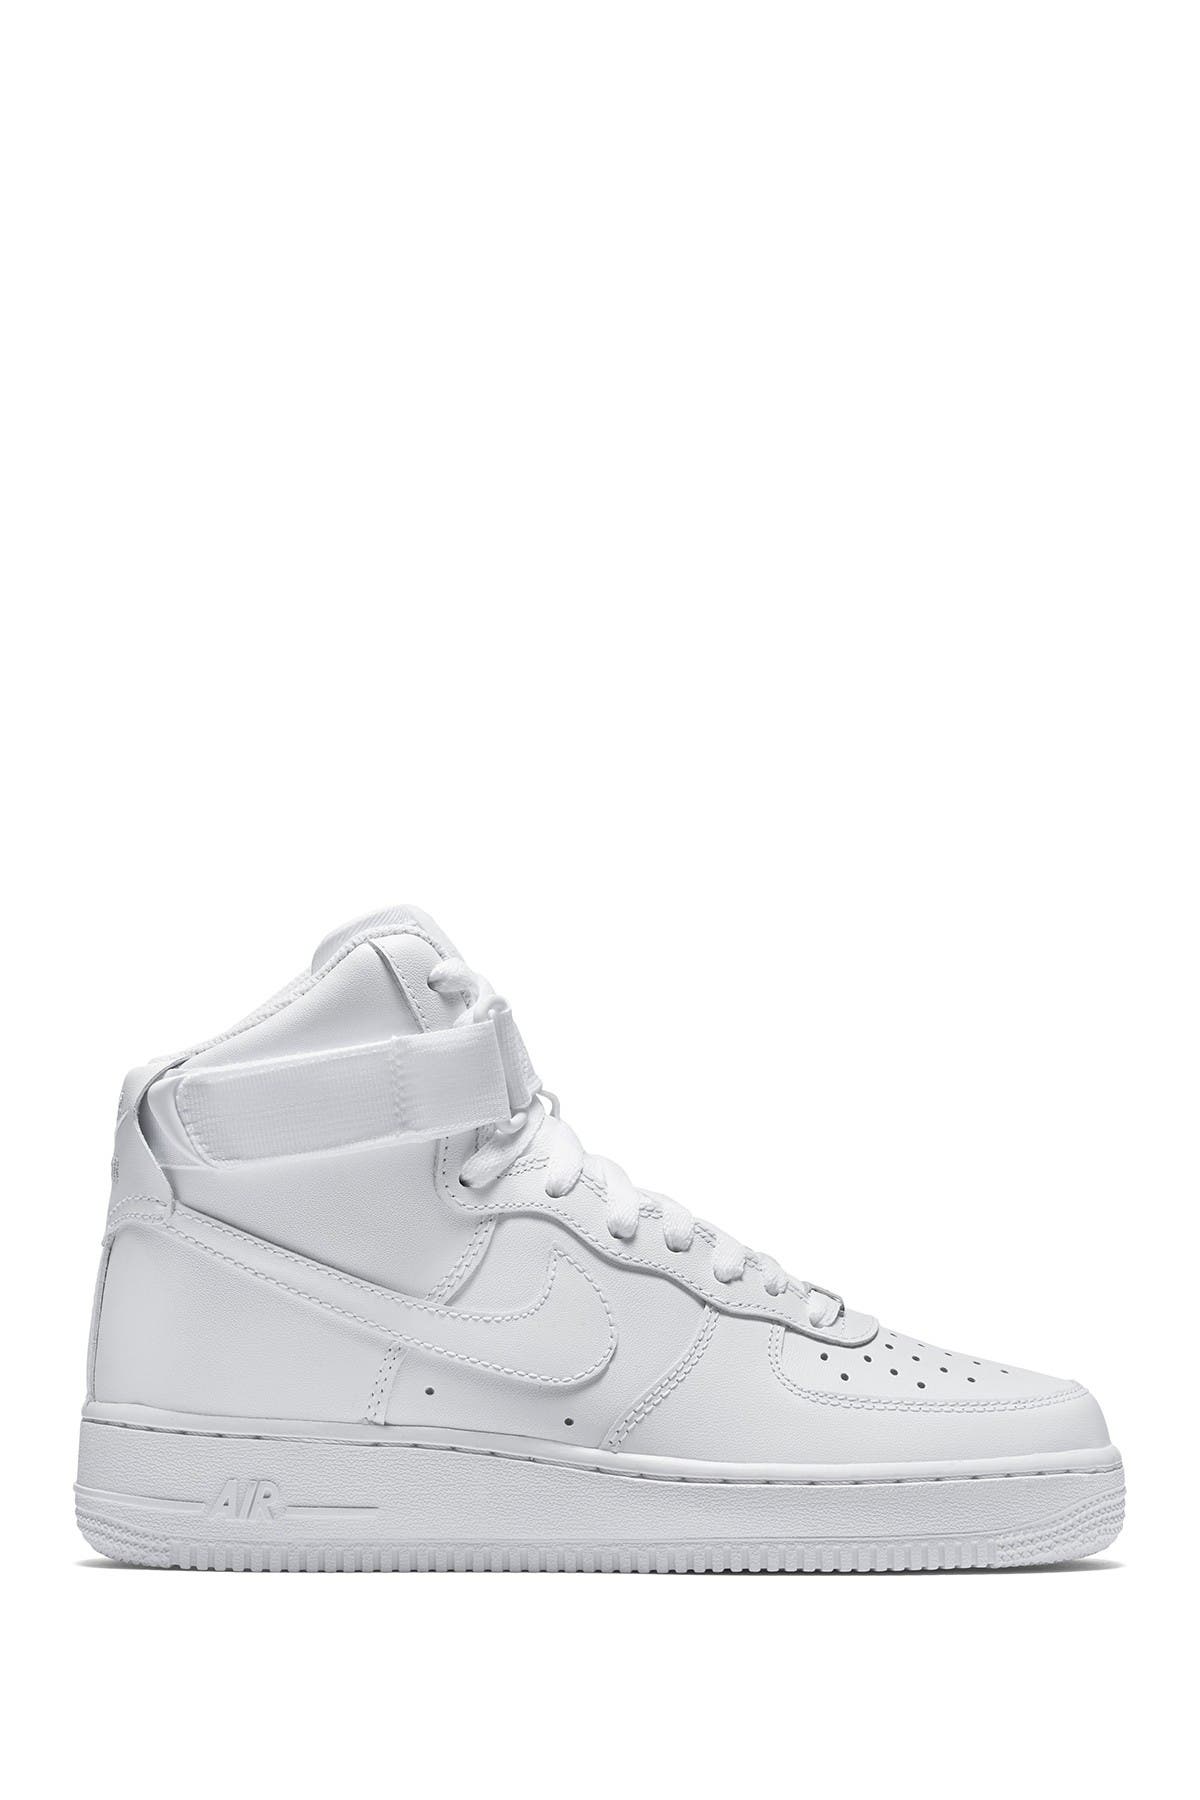 nordstrom air force 1s